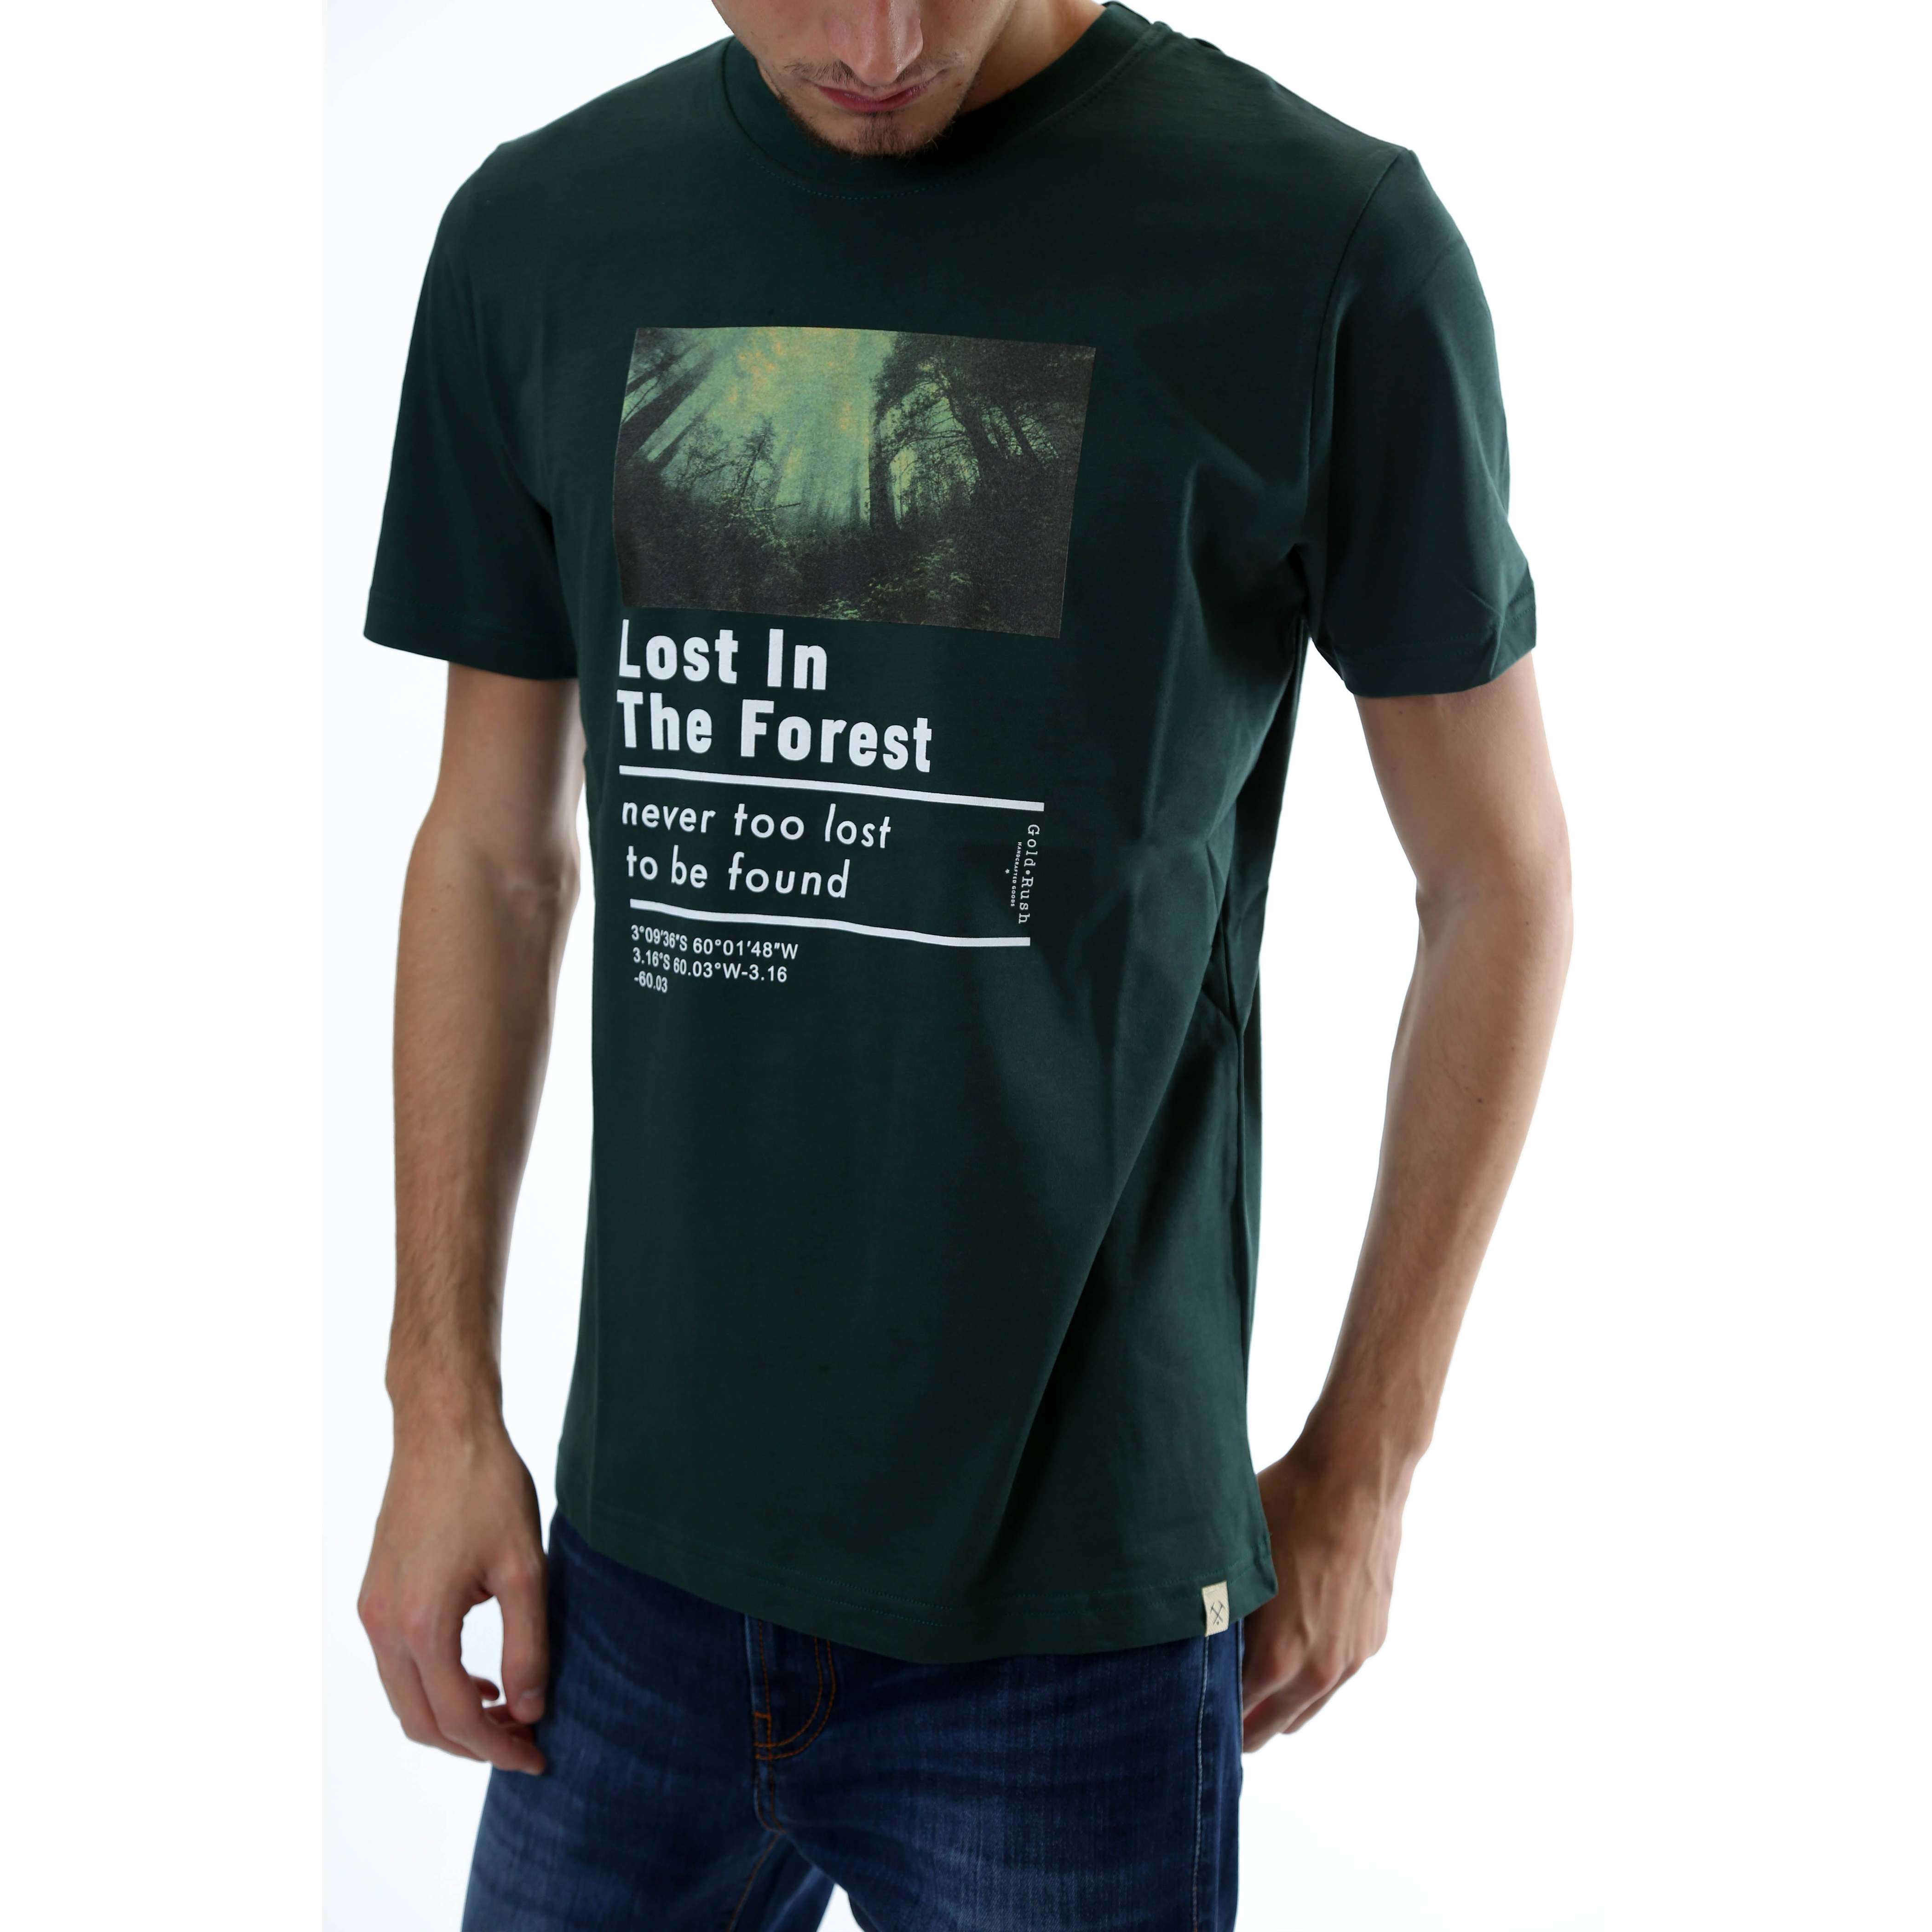 Gold Rush Uomo T-Shirt Stampa Forest Green